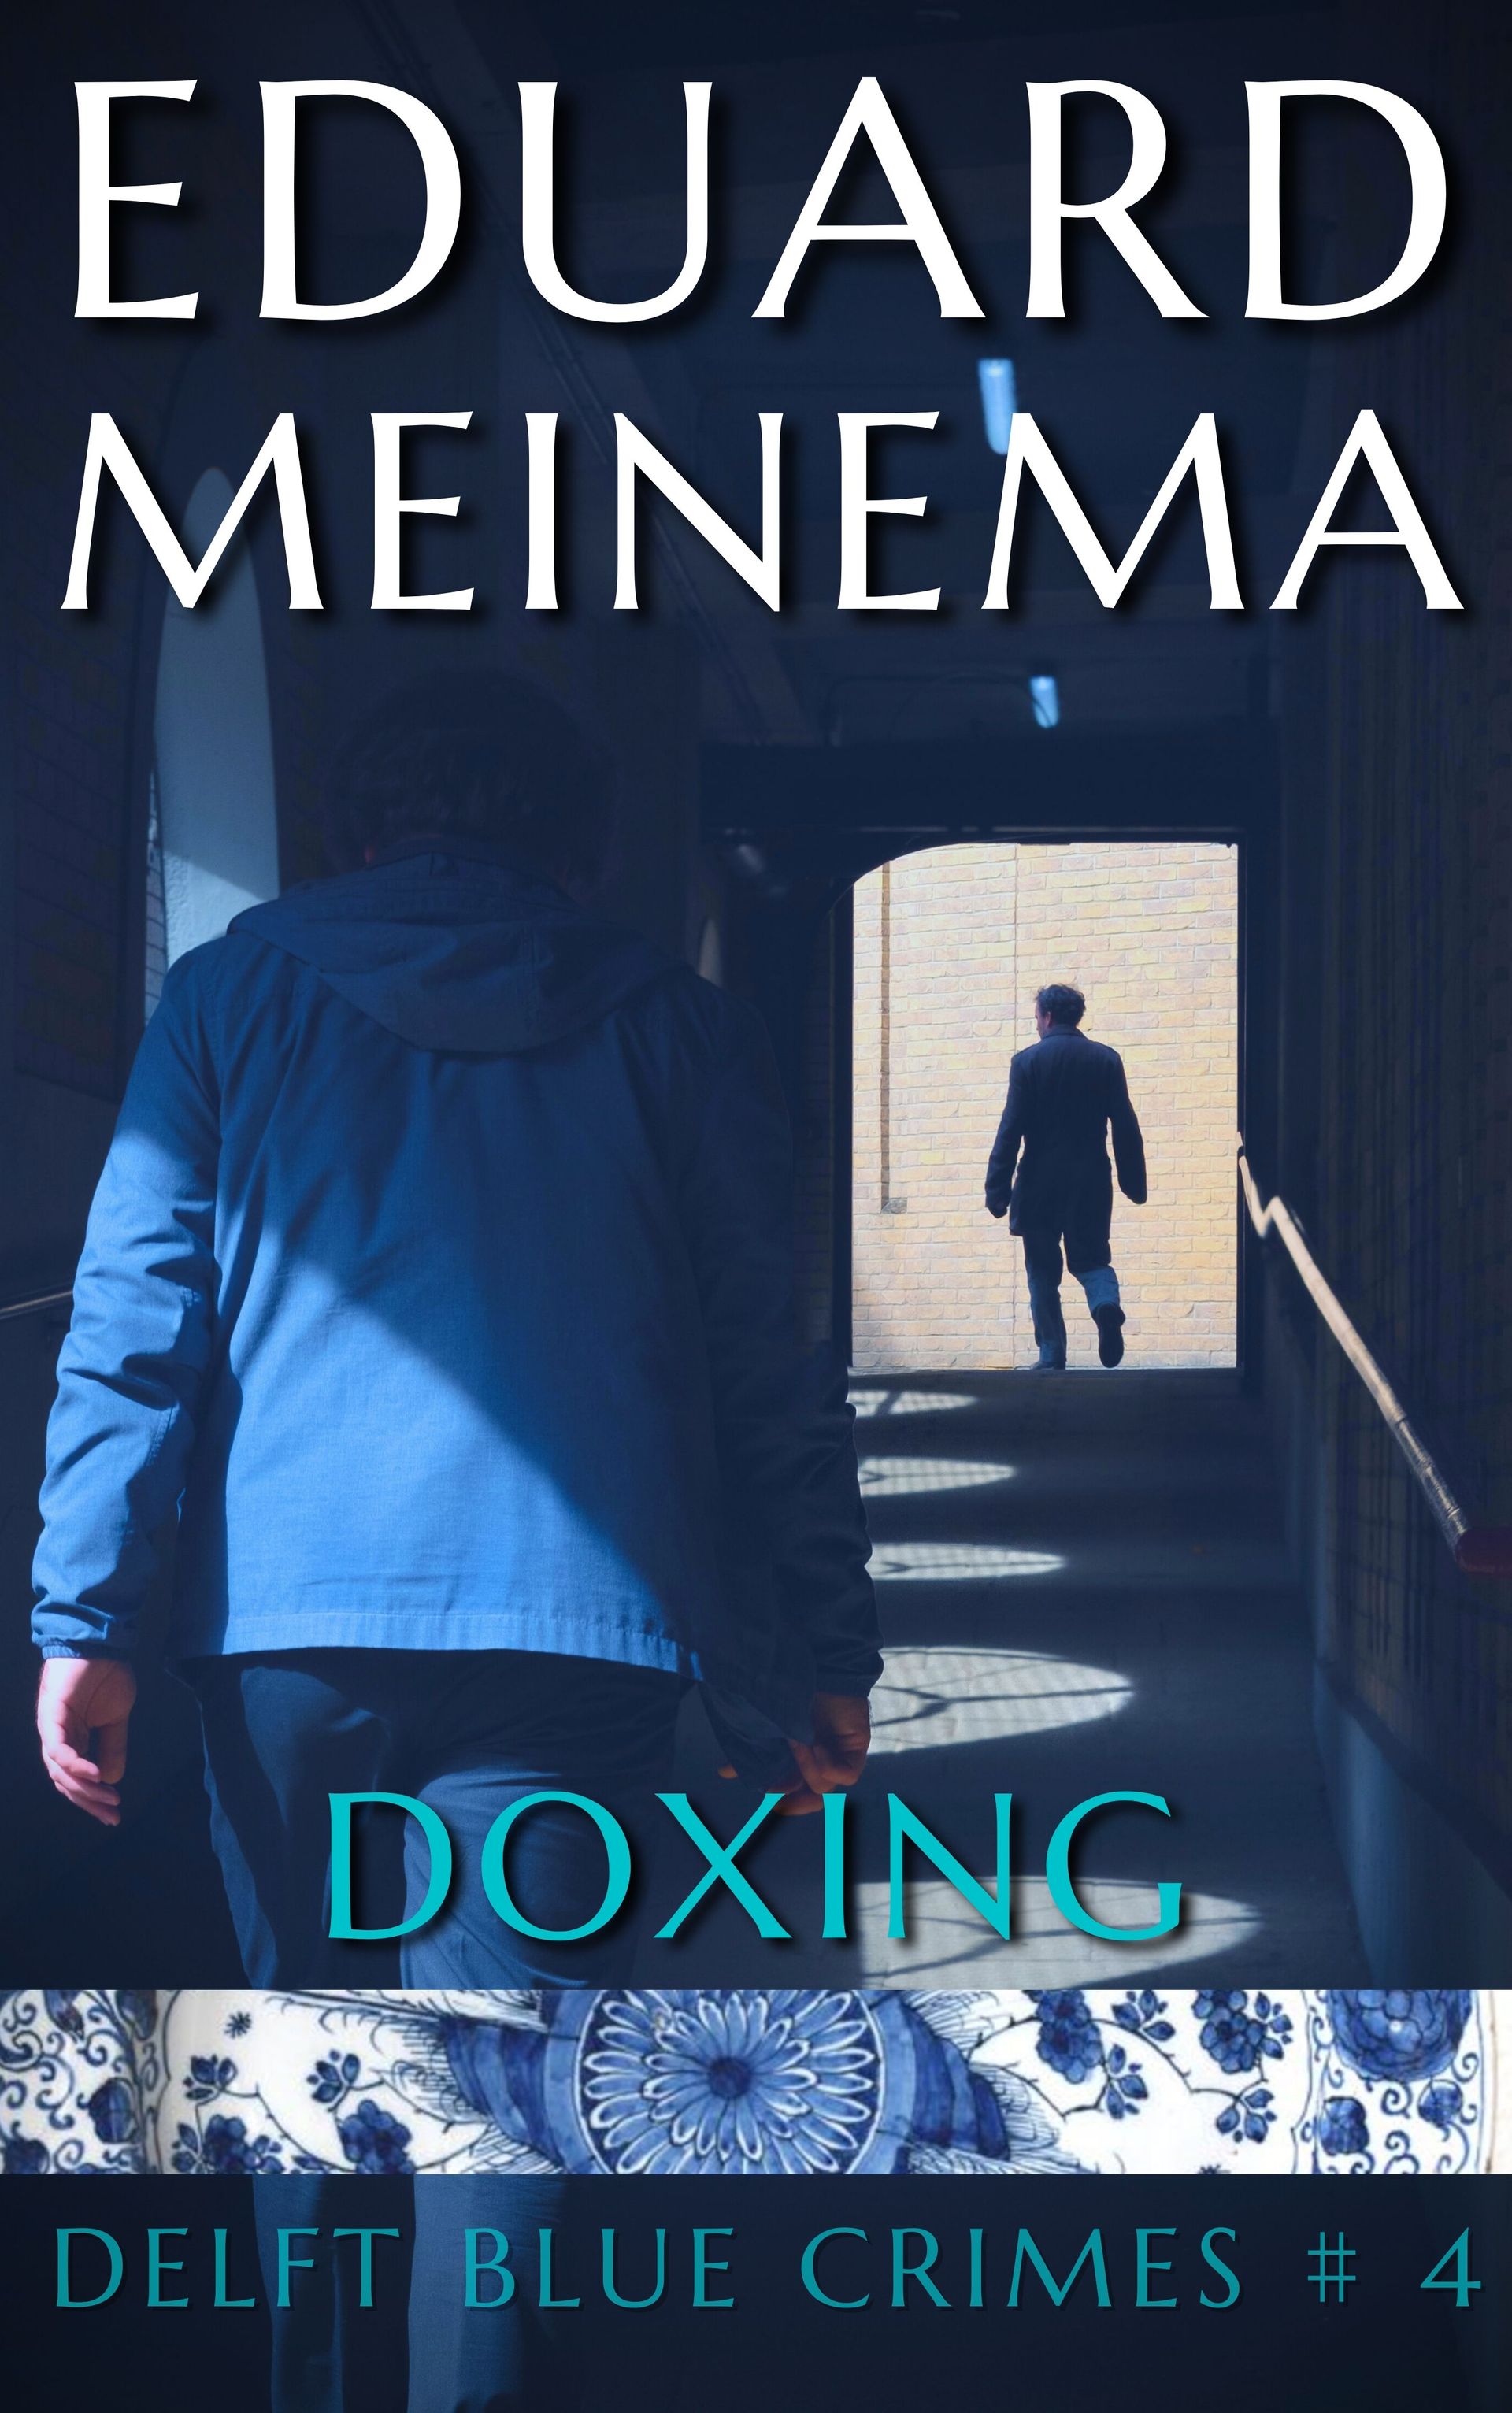 Doxing, Delft Blue Crimes Book 4, by Eduard Meinema